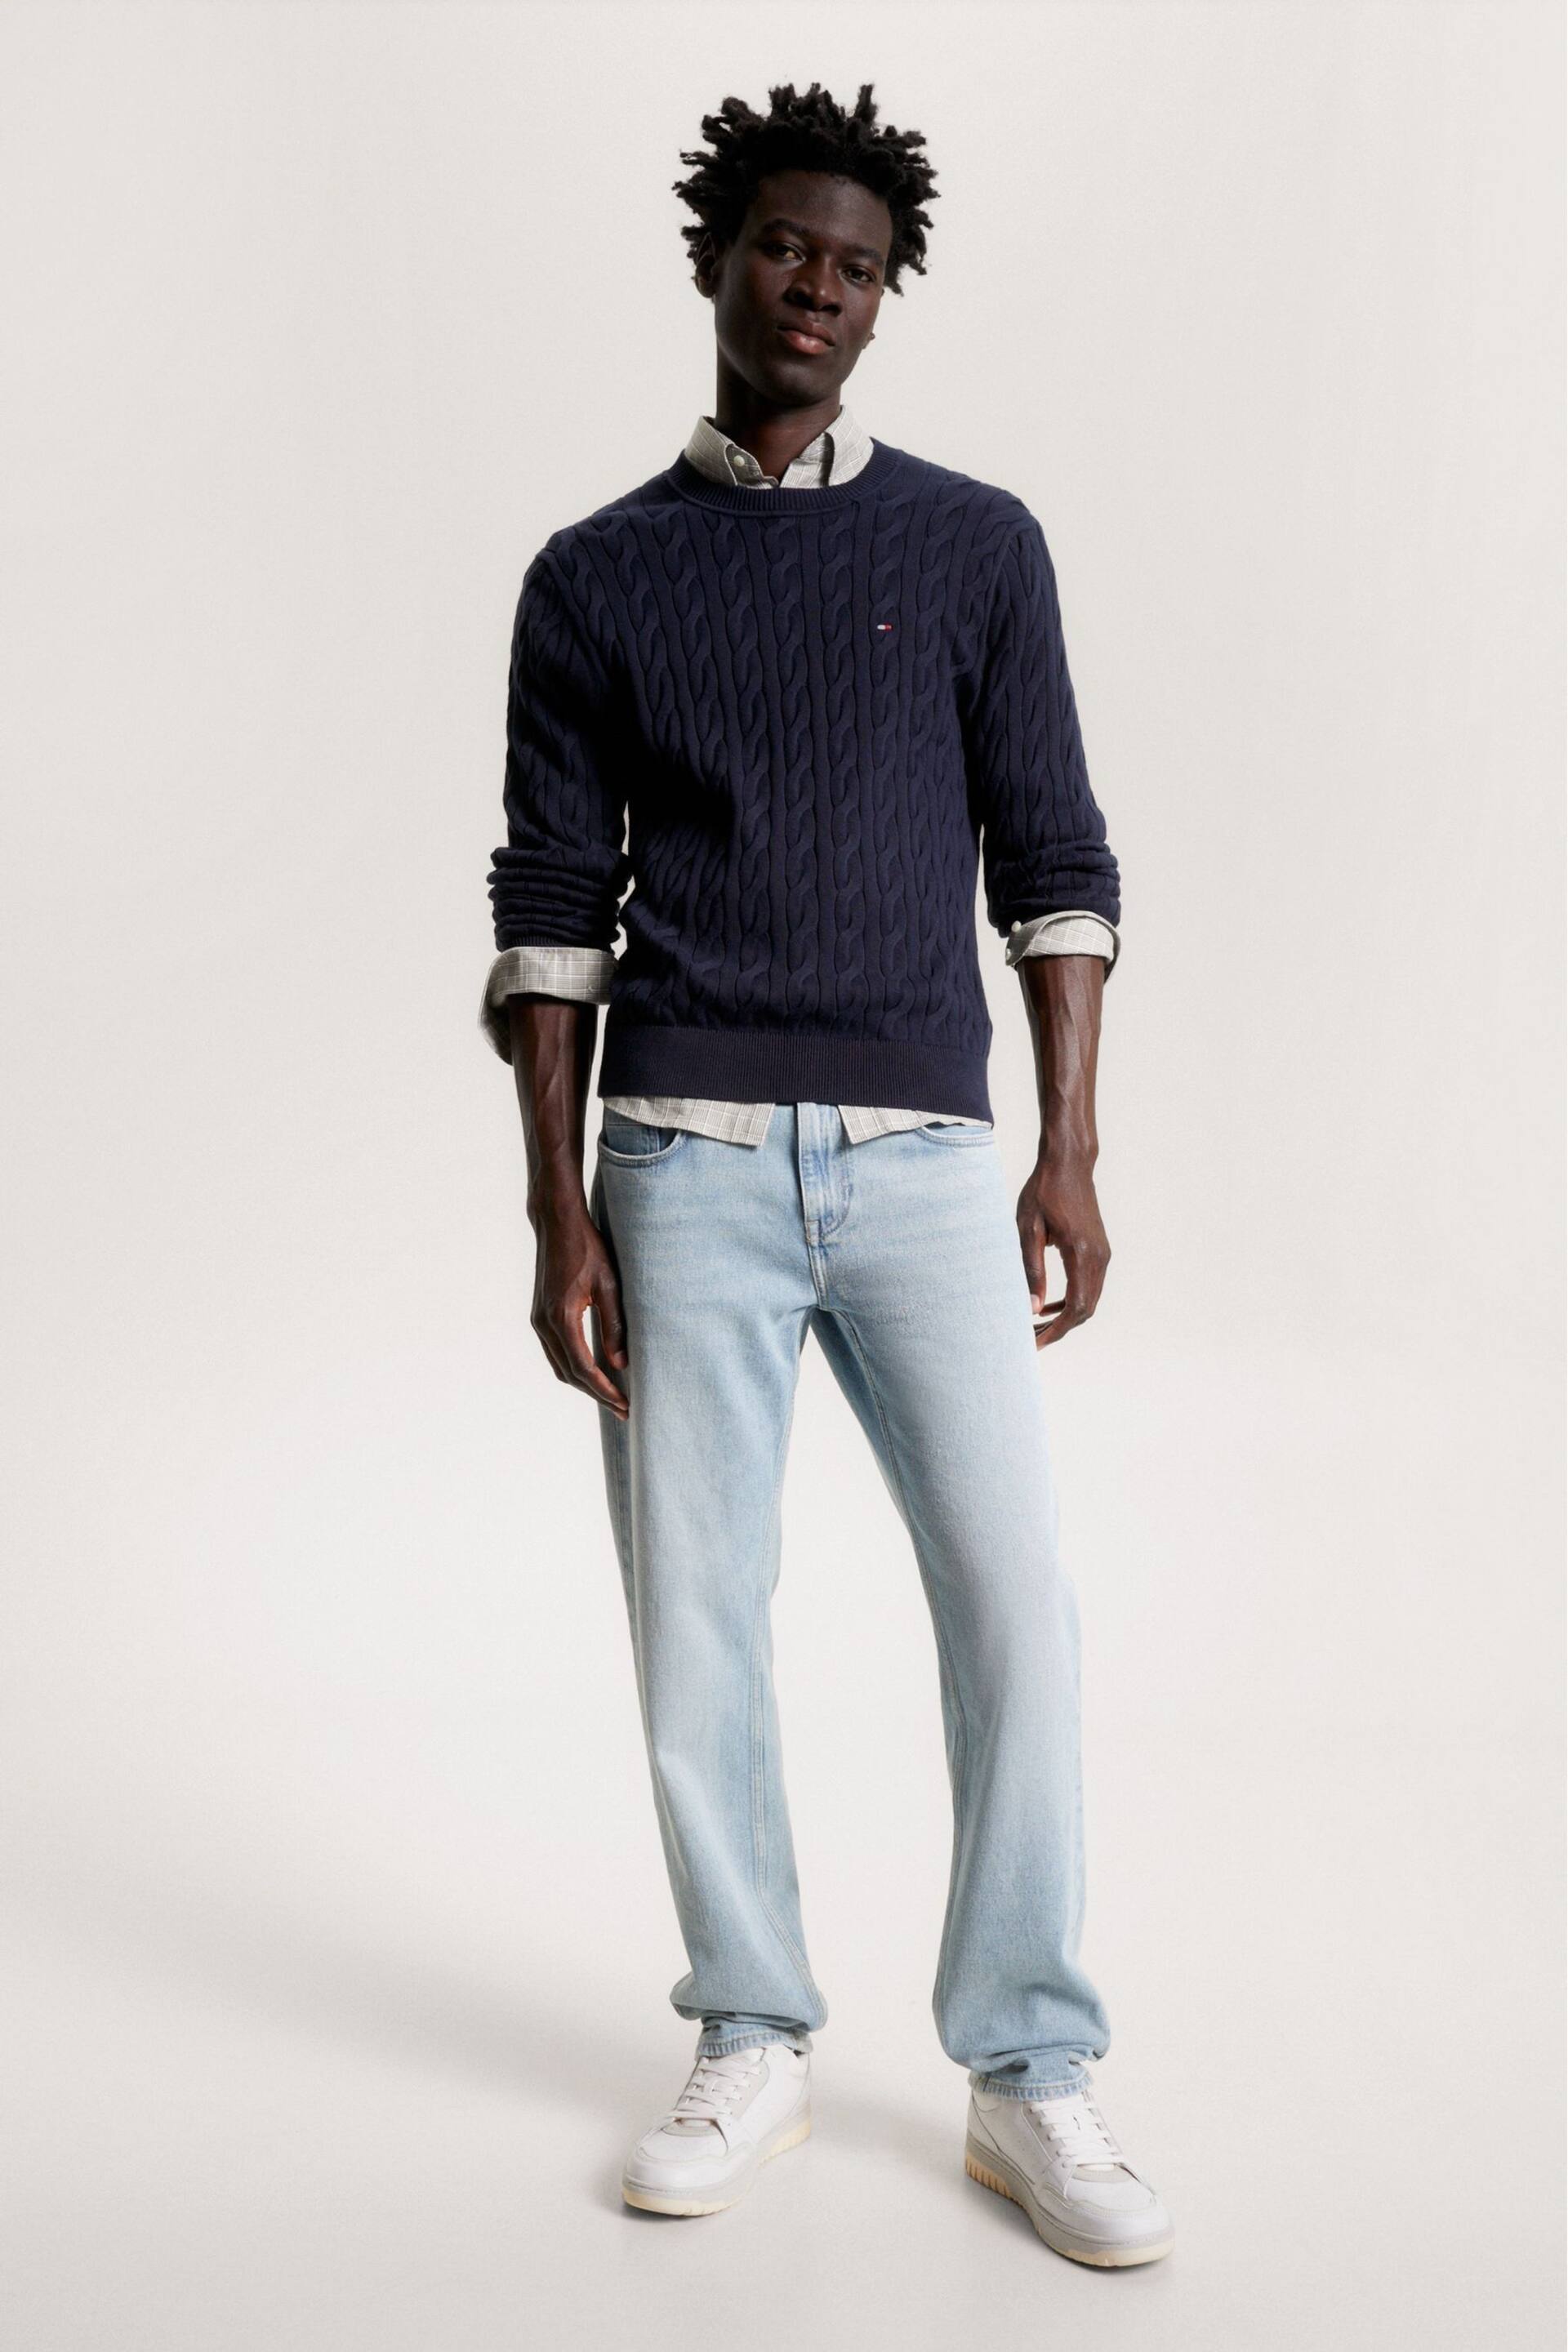 Tommy Hilfiger Blue Classic Cable Sweater - Image 3 of 5